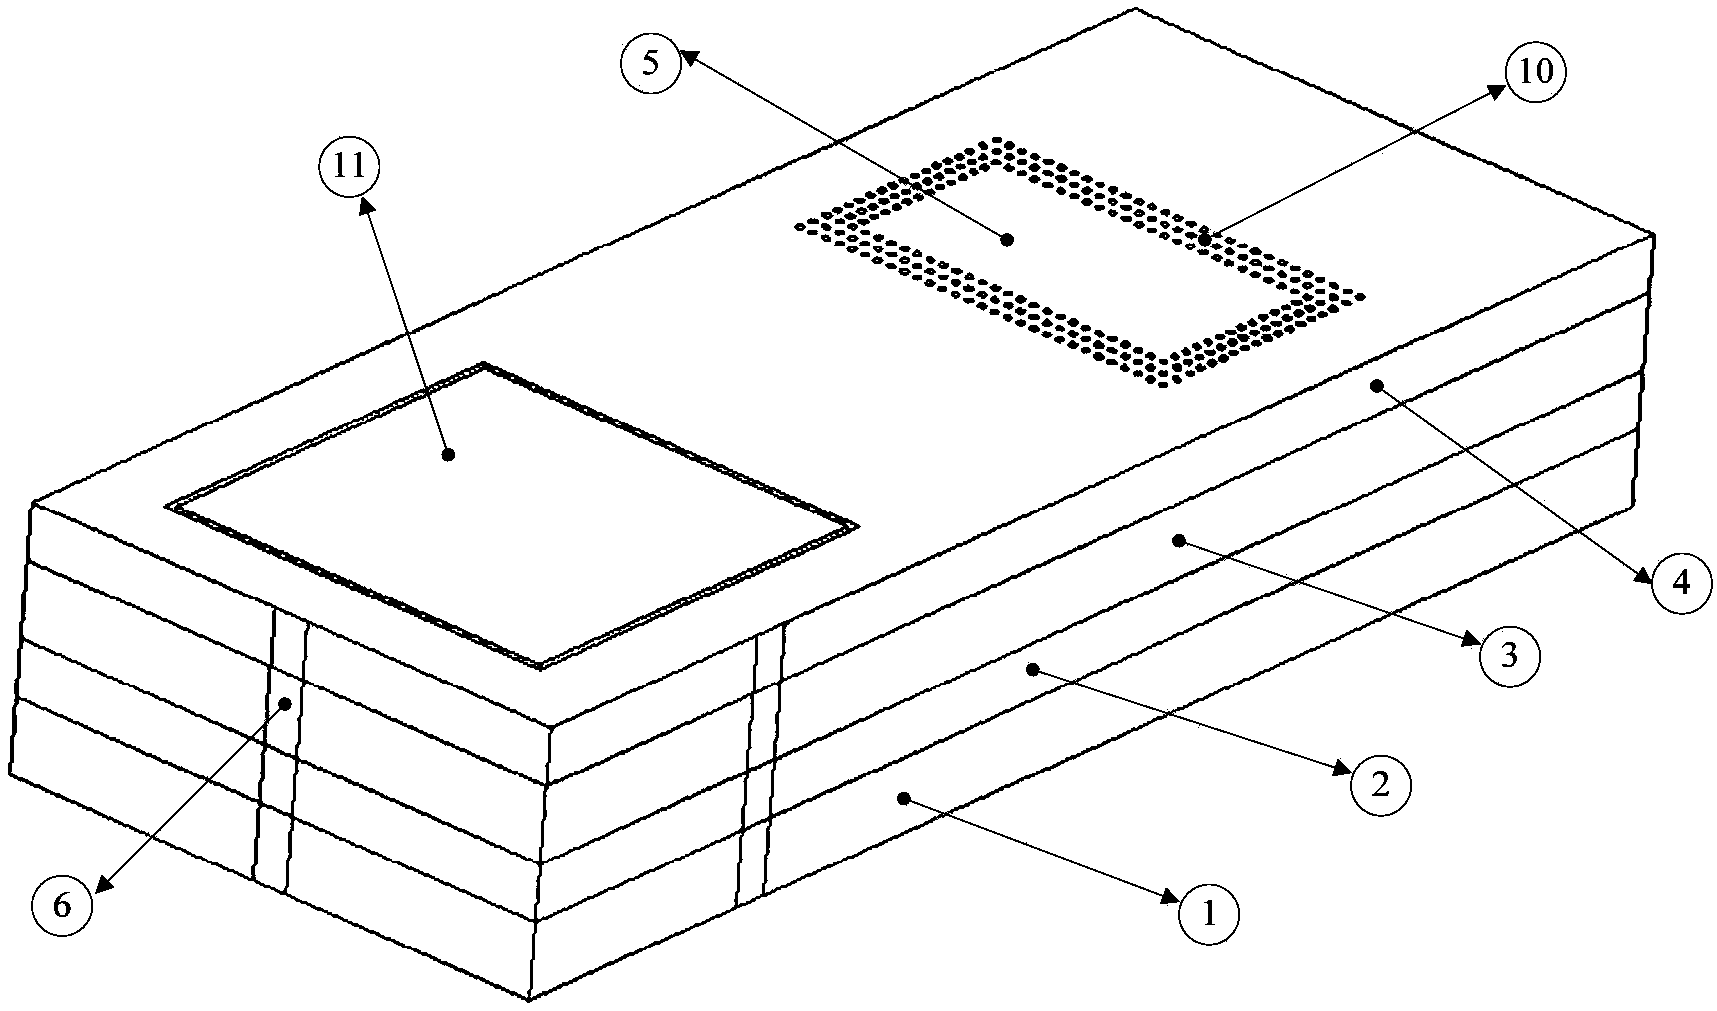 Packaging structure for integrating VCO and waveguide antenna